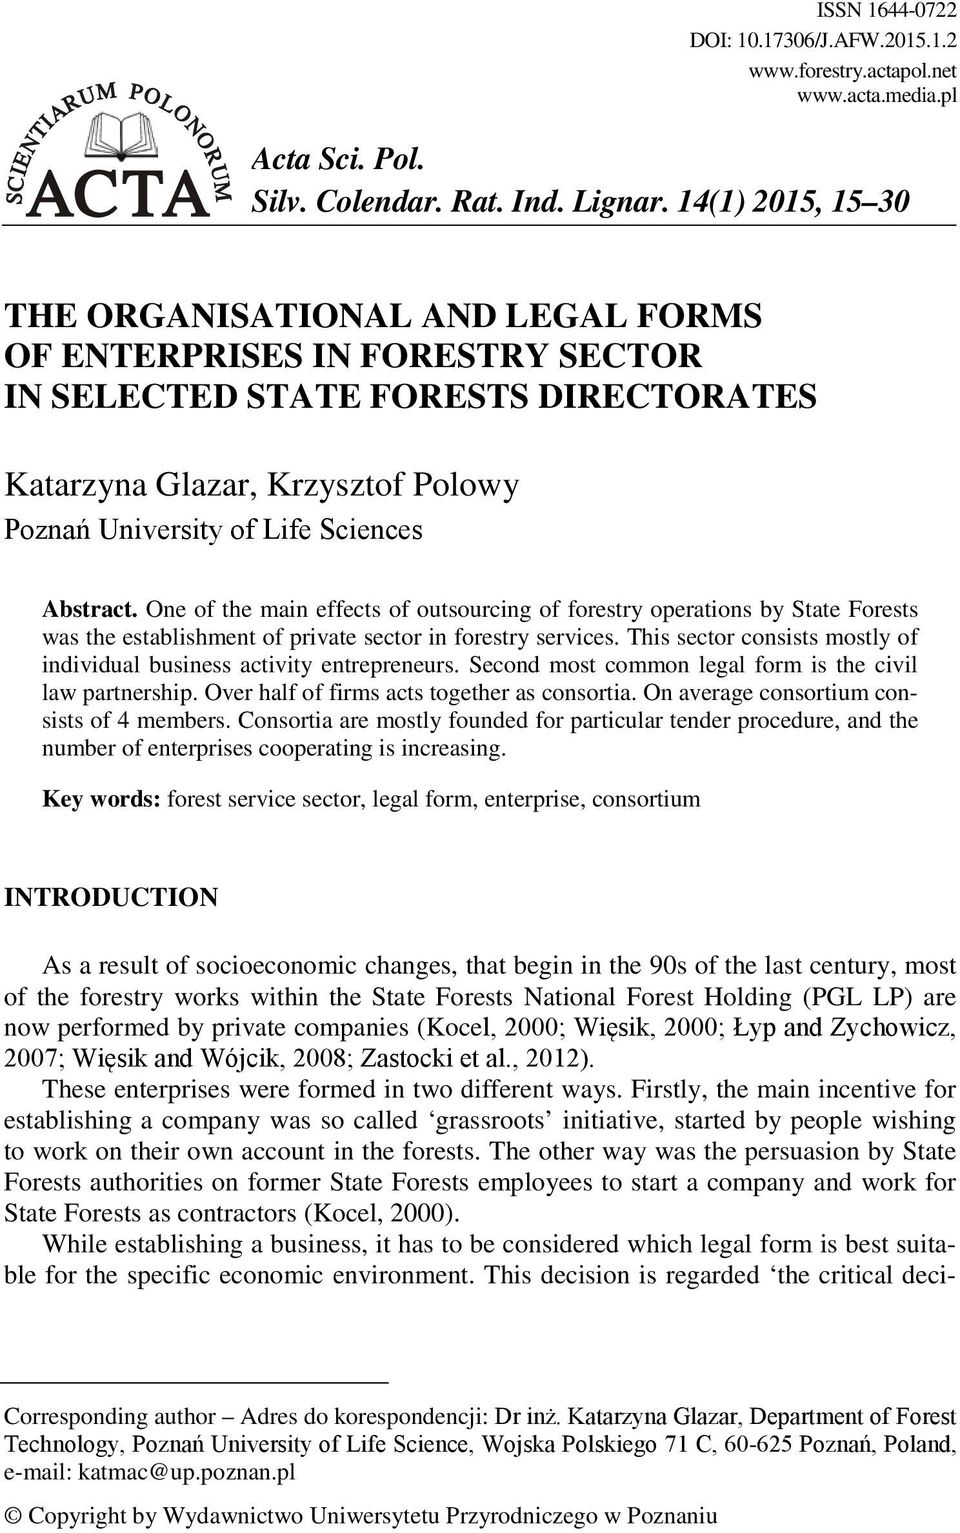 Abstract. One of the main effects of outsourcing of forestry operations by State Forests was the establishment of private sector in forestry services.